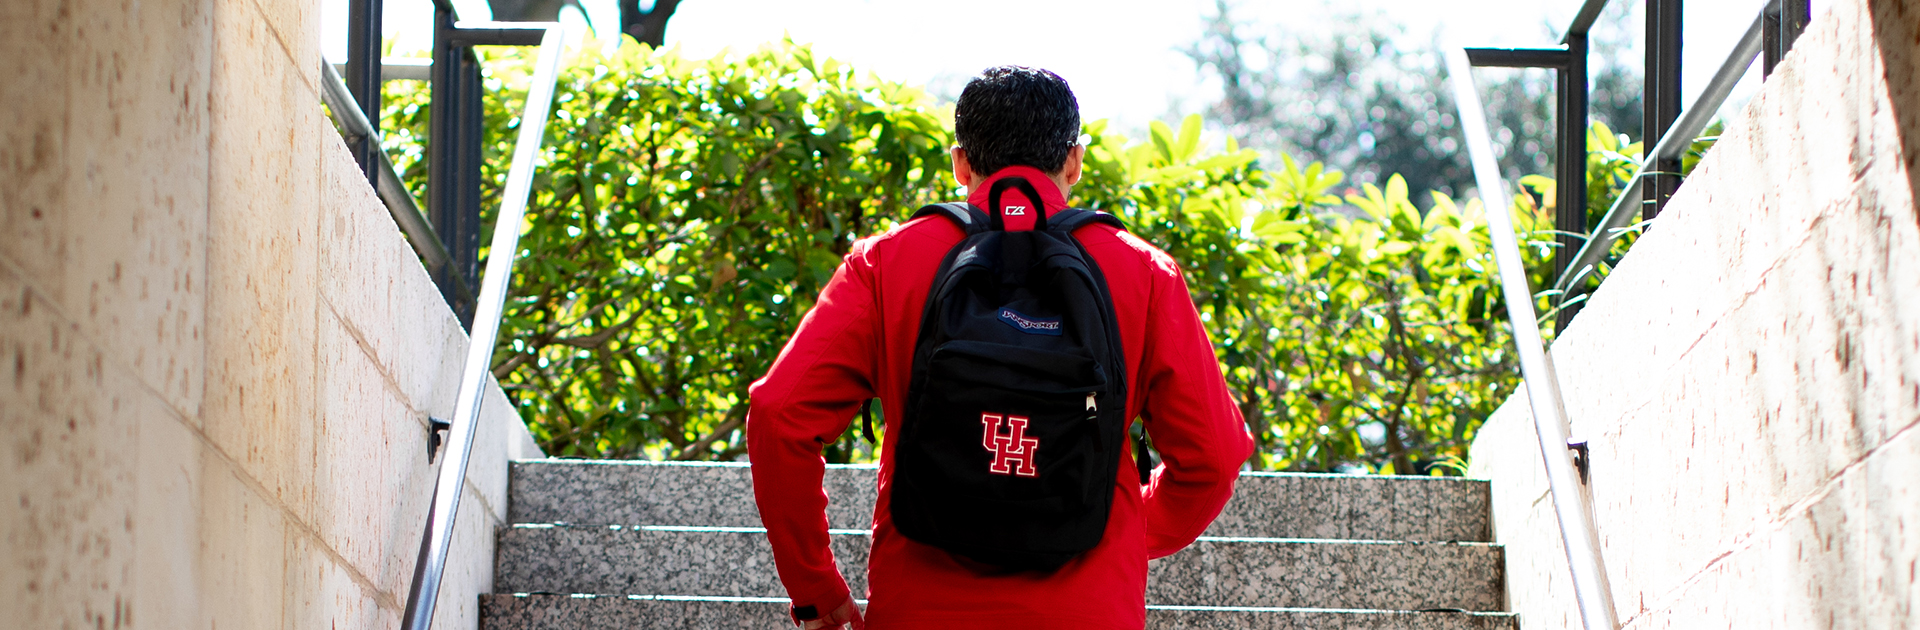 Student with UH backpack walking up stairs